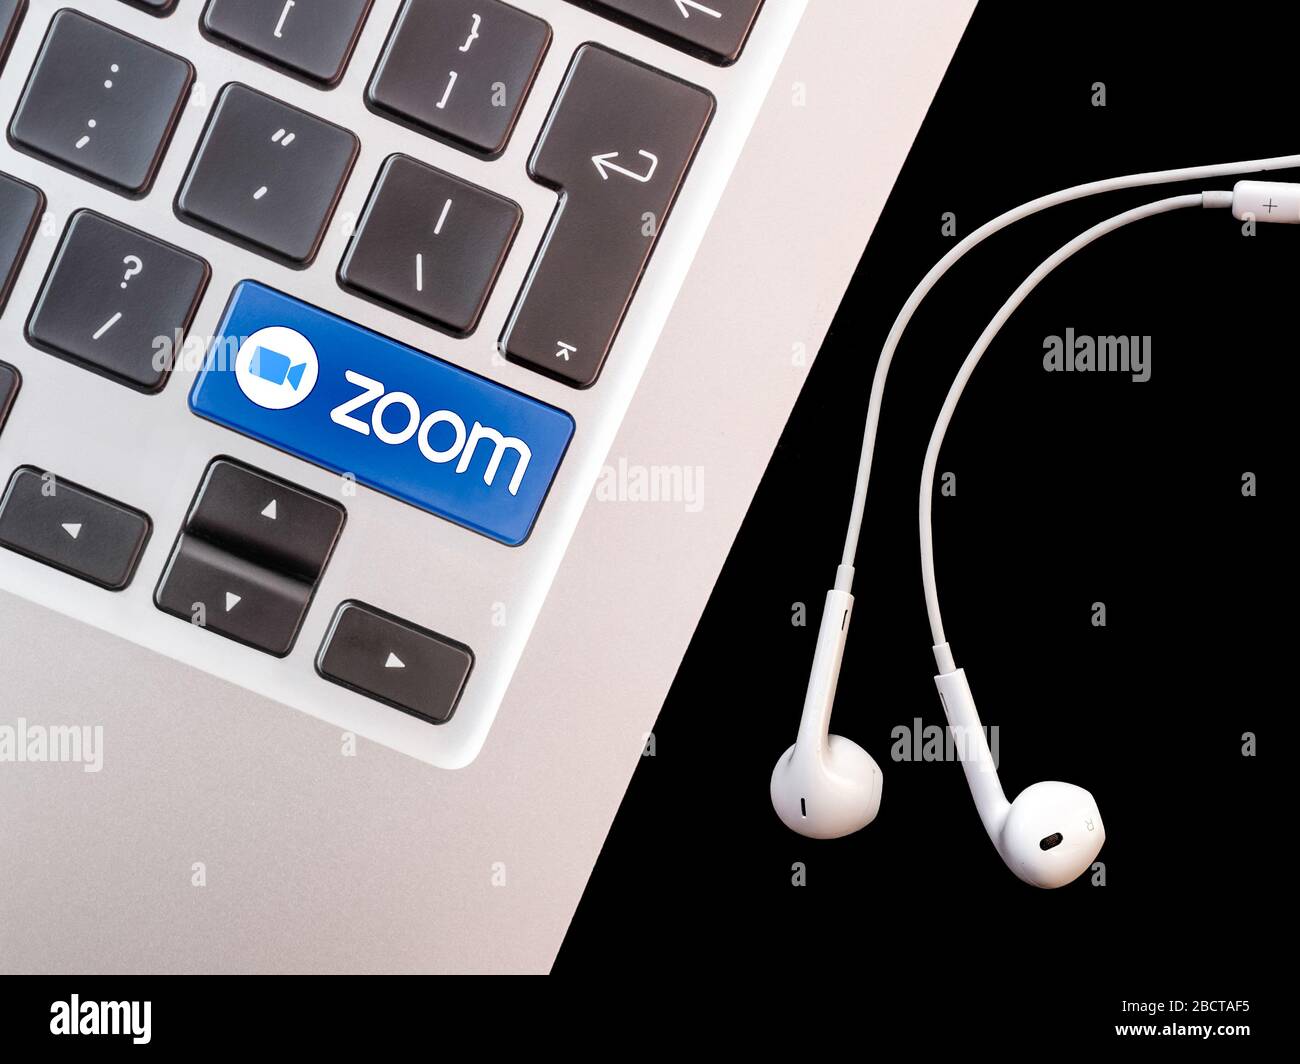 Brussels, Belgium - 4 April 2020: zoom logo on a laptop keyboard. Illustration of the popular app for remote conferencing. Stock Photo